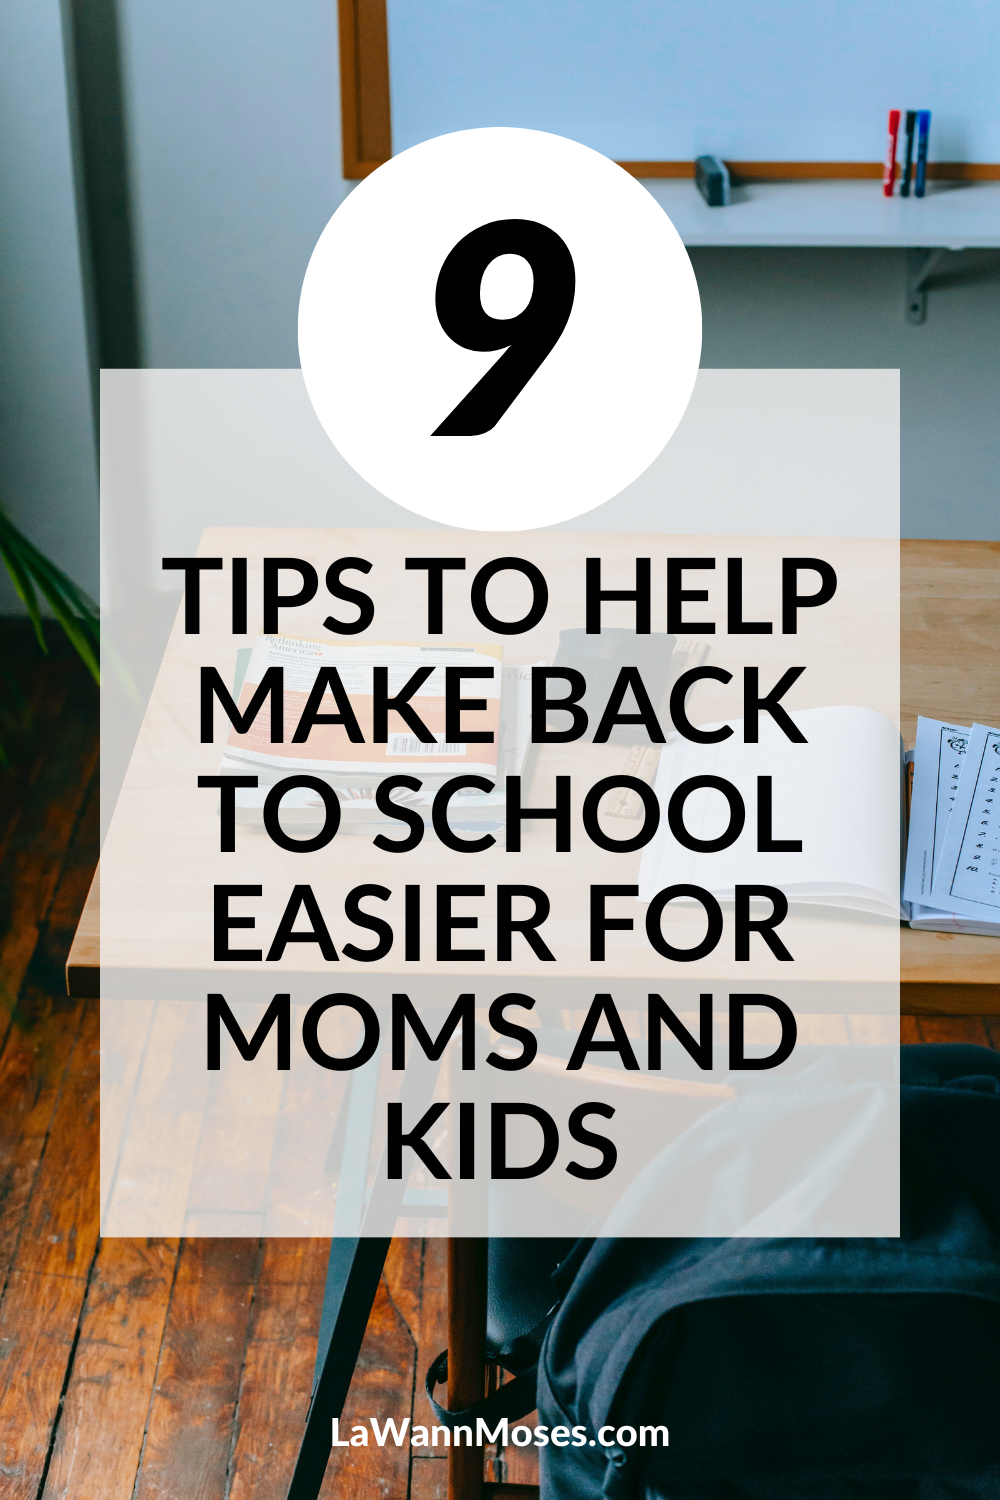 9 Tips to Help Make Back to School Easier for Moms and Kids